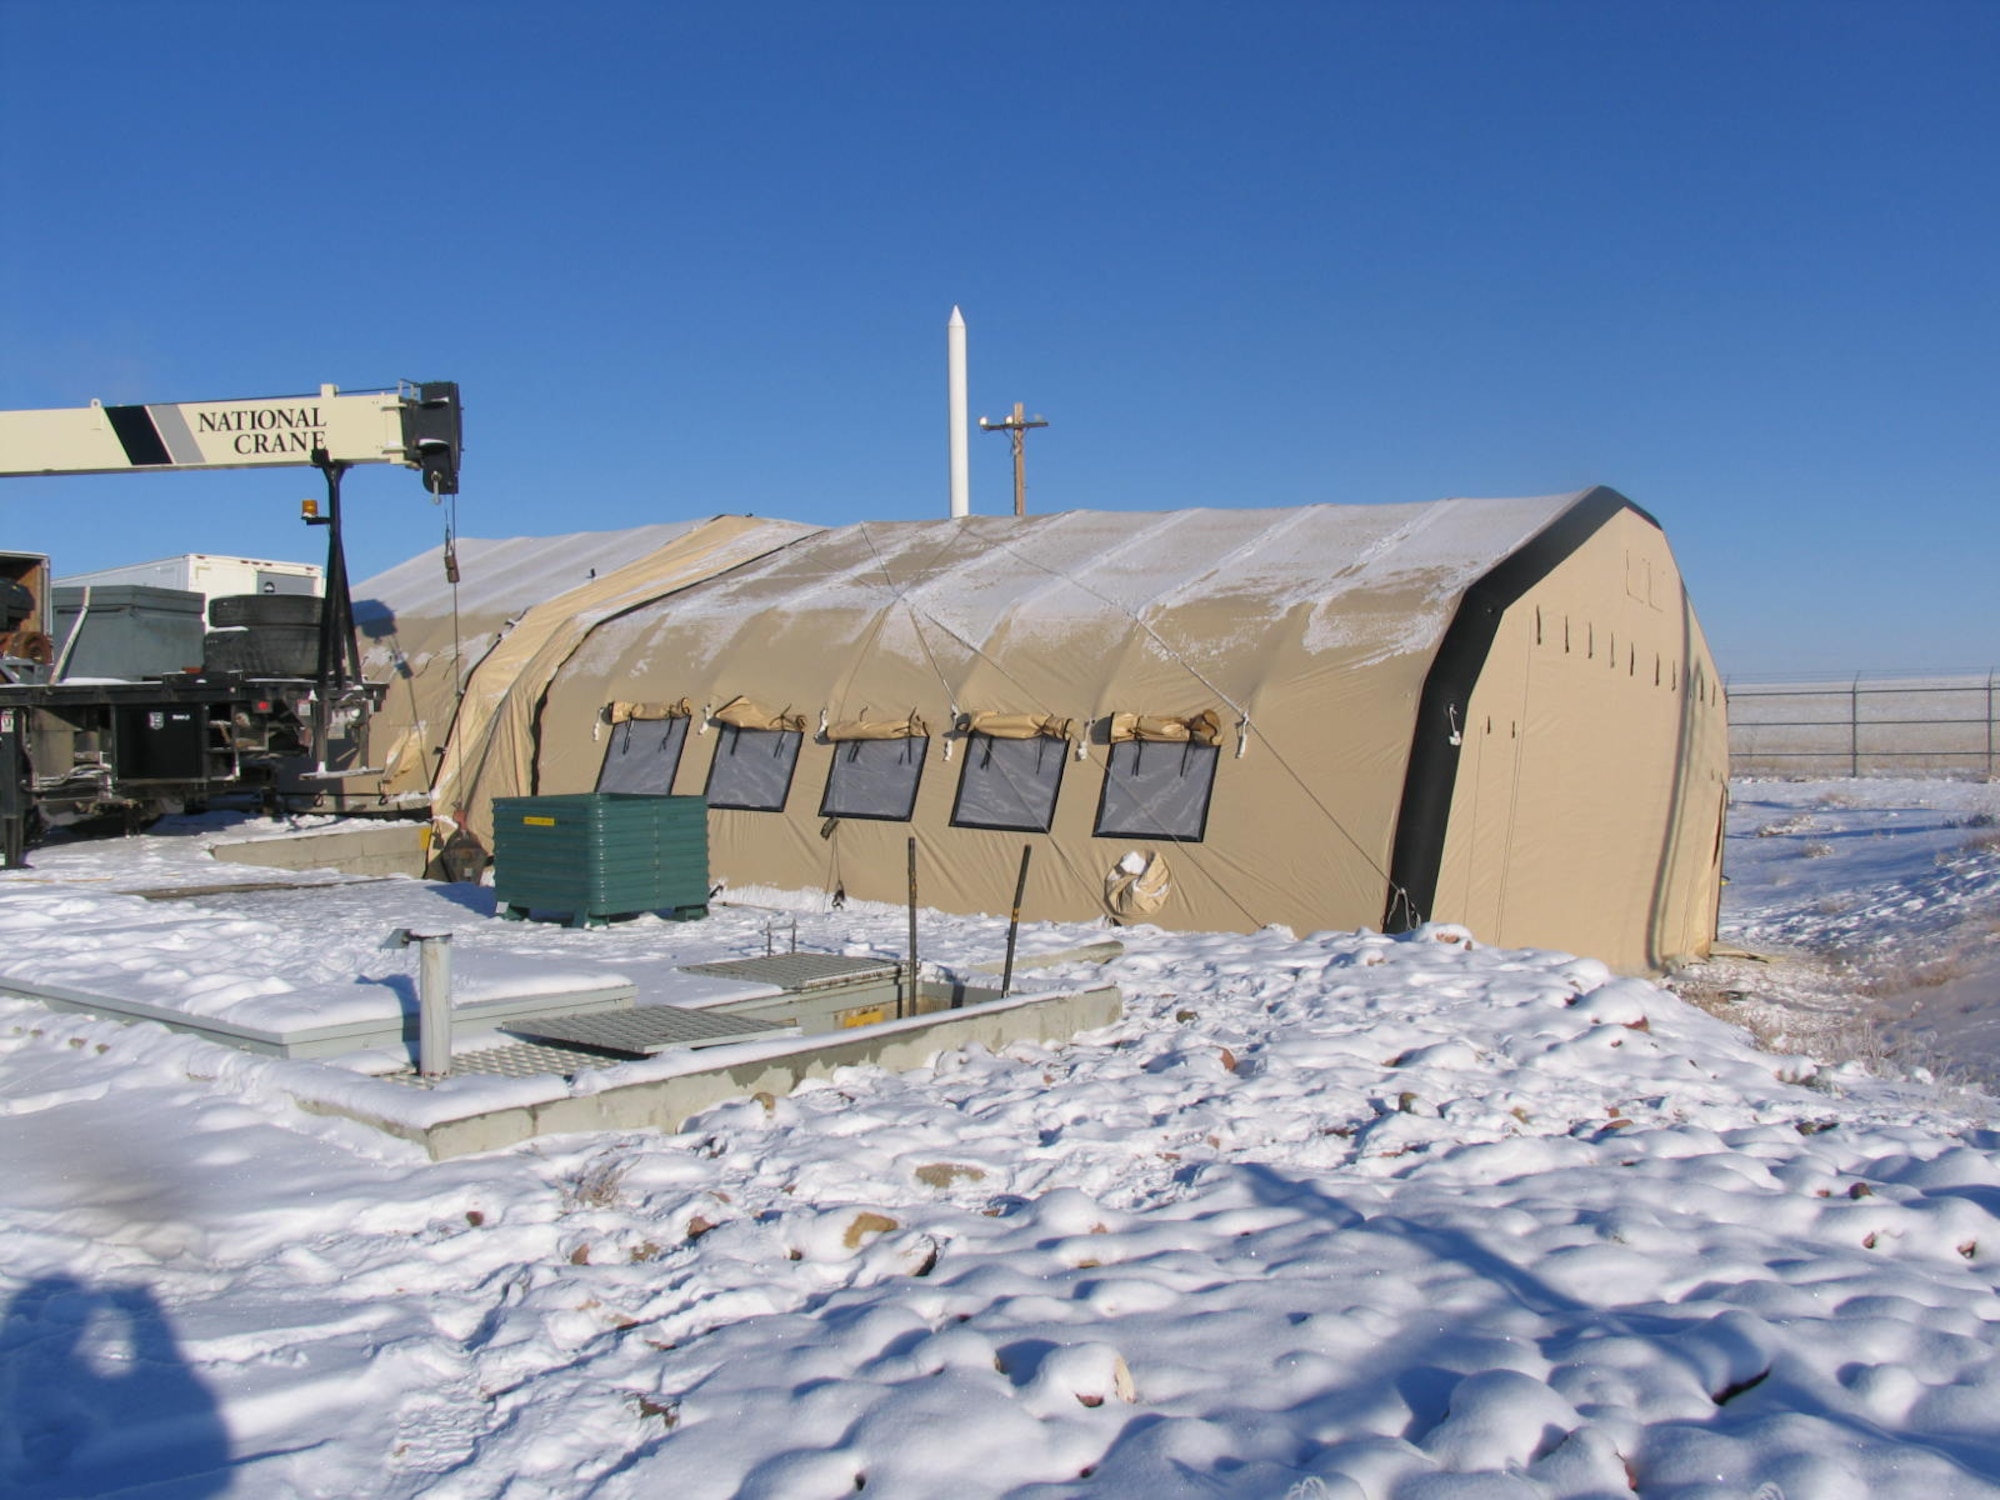 An inflatable shelter covers Launch Facility K-02 during Program Depot Maintenance at Malmstrom AFB, Montana, Feb. 8, 2017. (U.S Air Force photo)